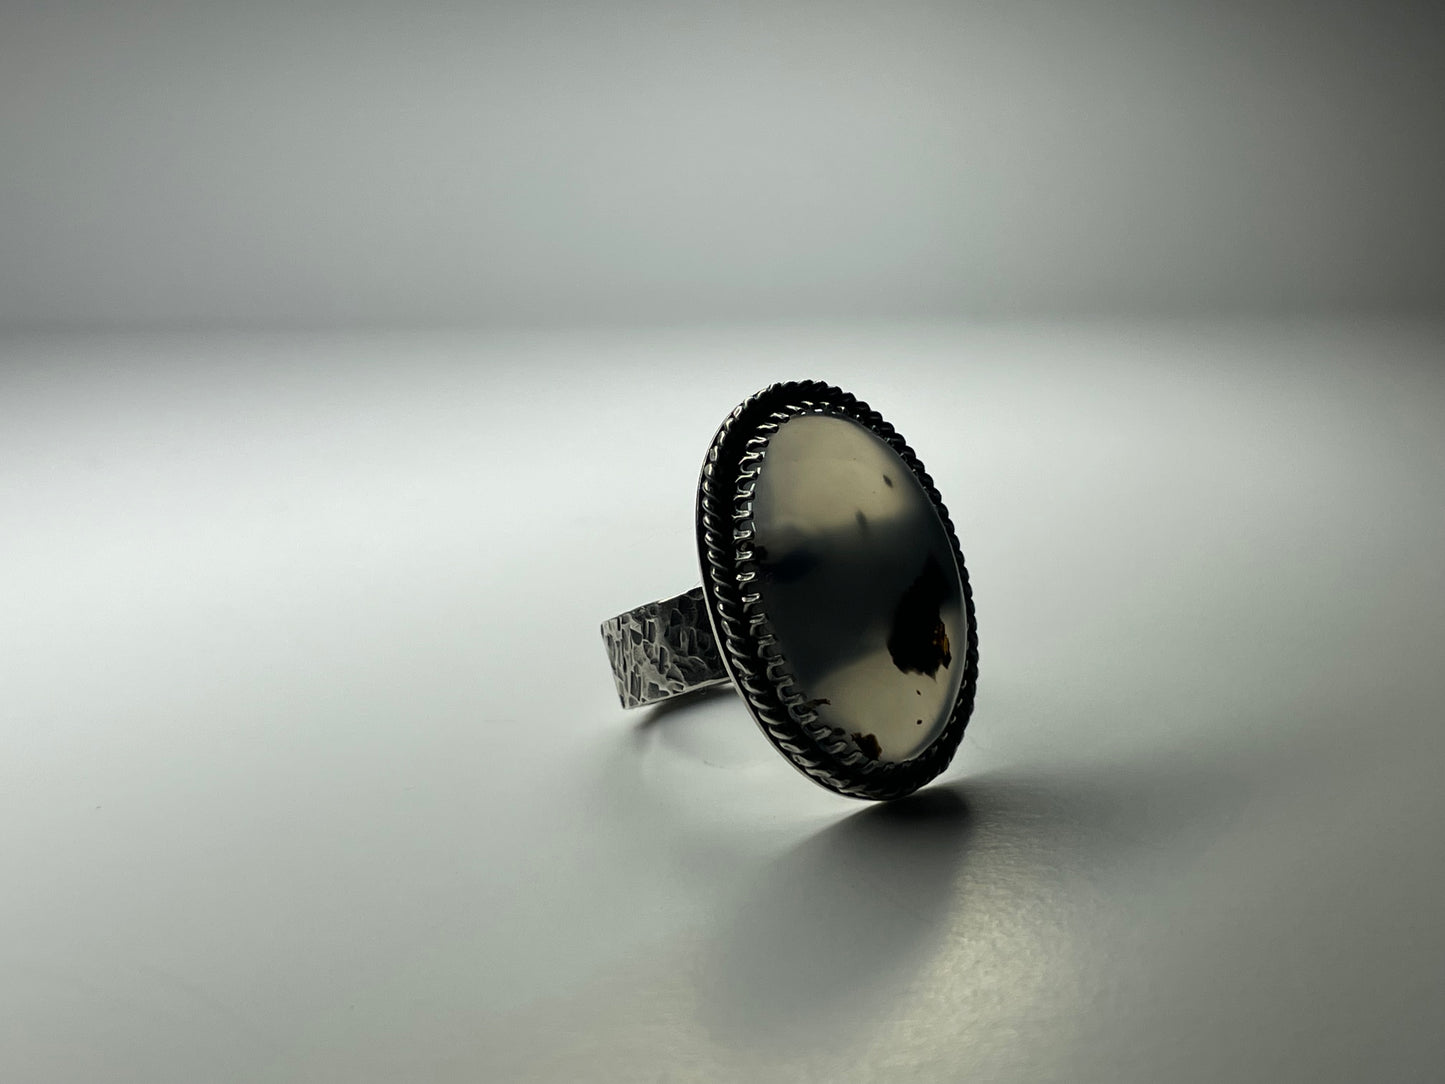 Montana Agate and Sterling Ring - US 6.75